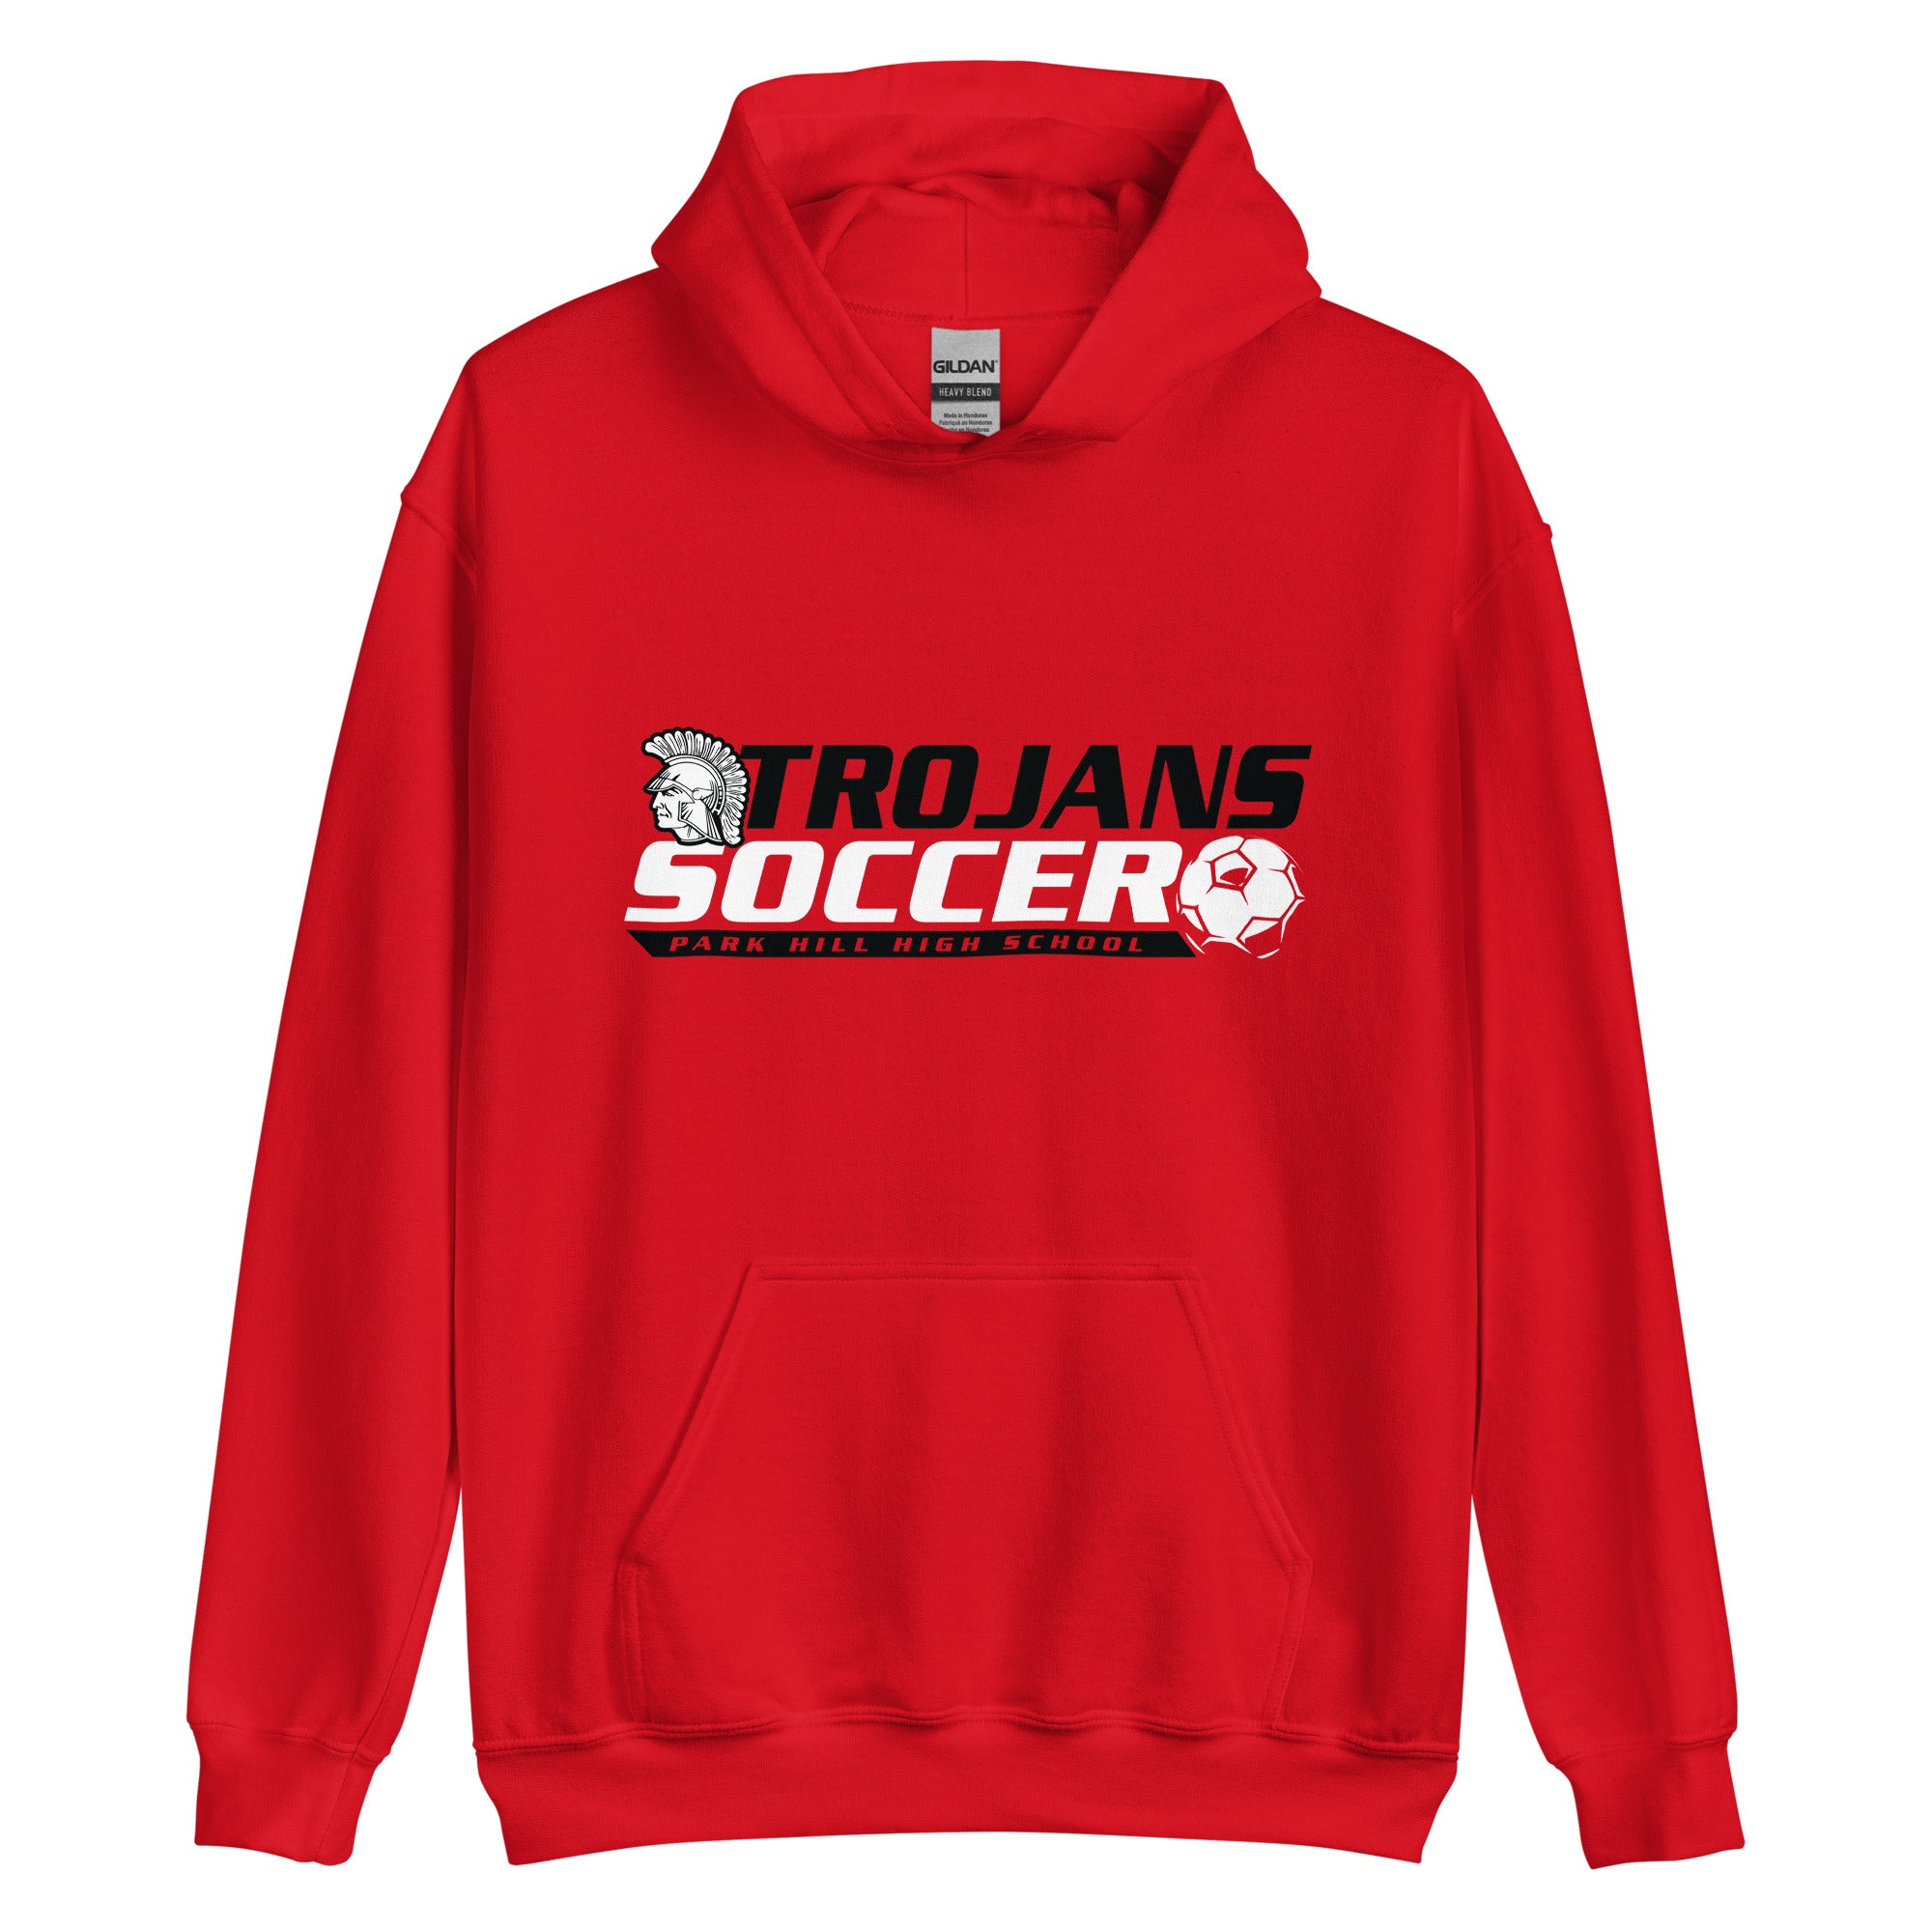 Park Hill Men's Soccer 1 (Front Only) Unisex Hoodie